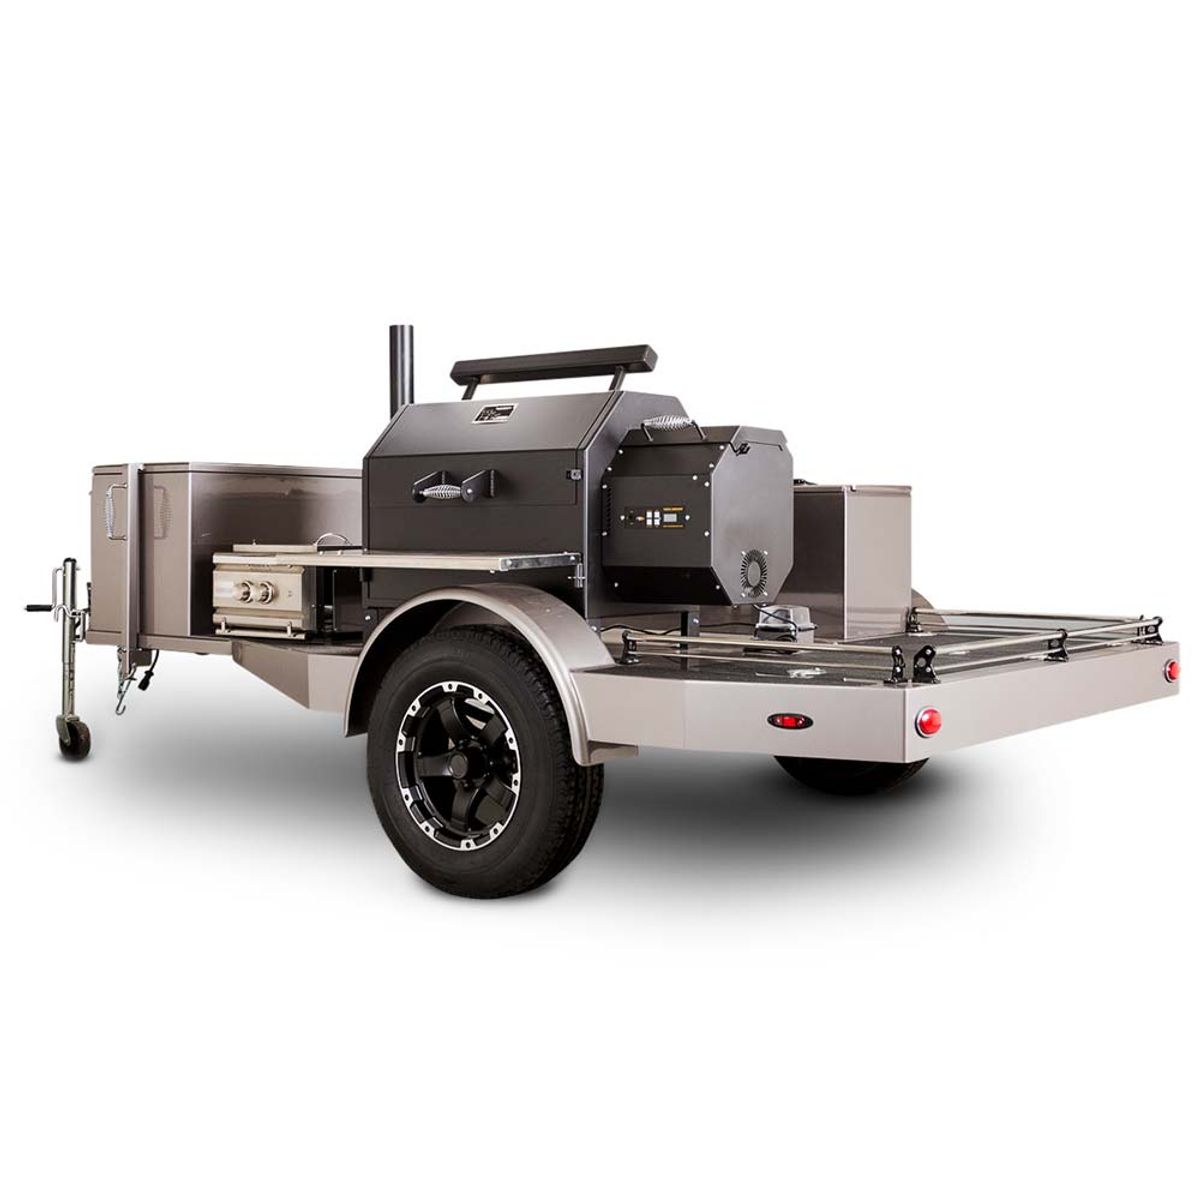 Yoder 640 grill on trailer